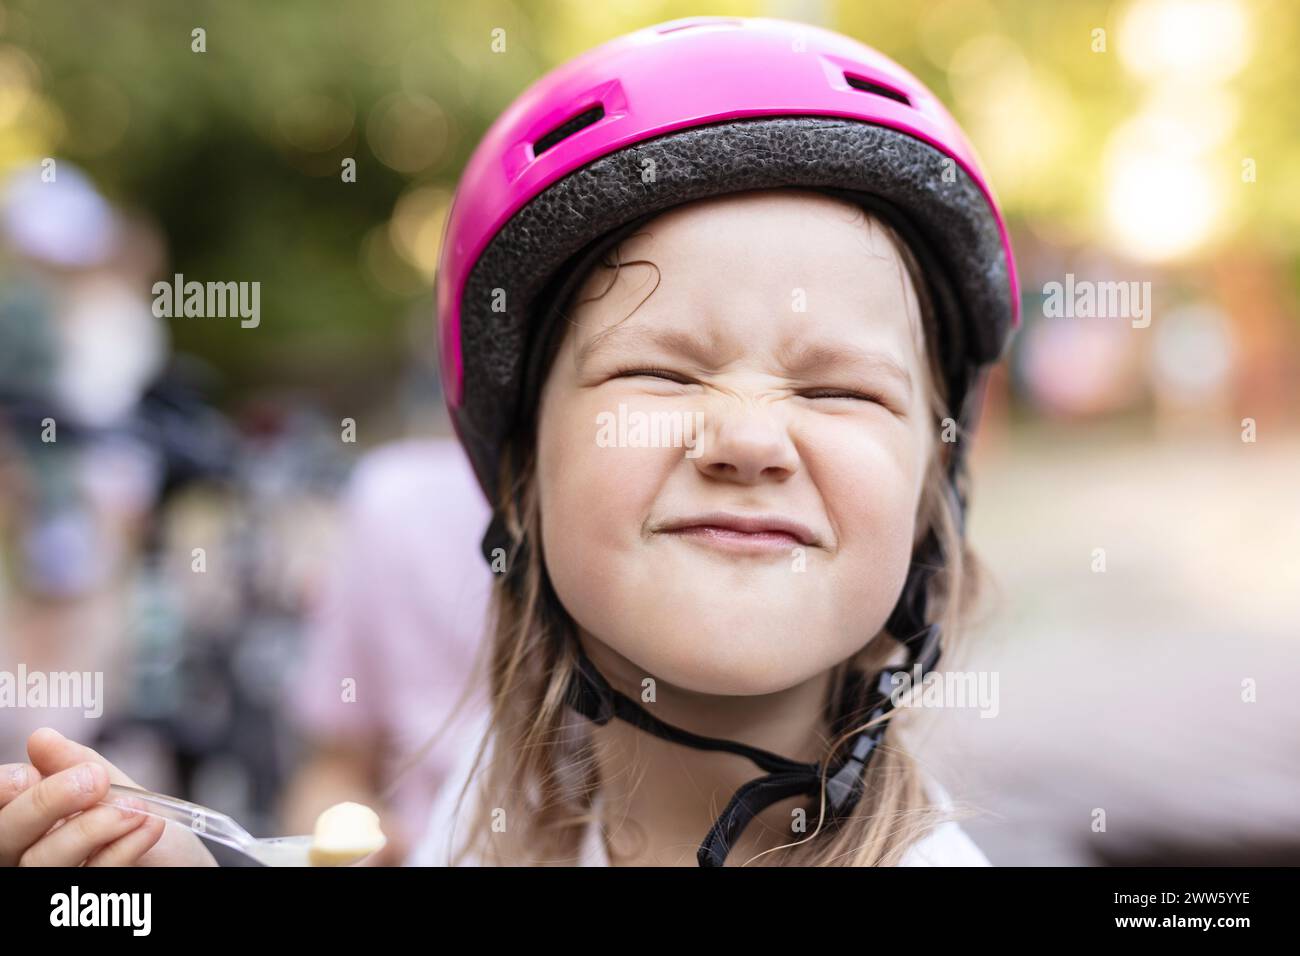 Cute young girl in helmet eating ice cream and making funny face Stock Photo